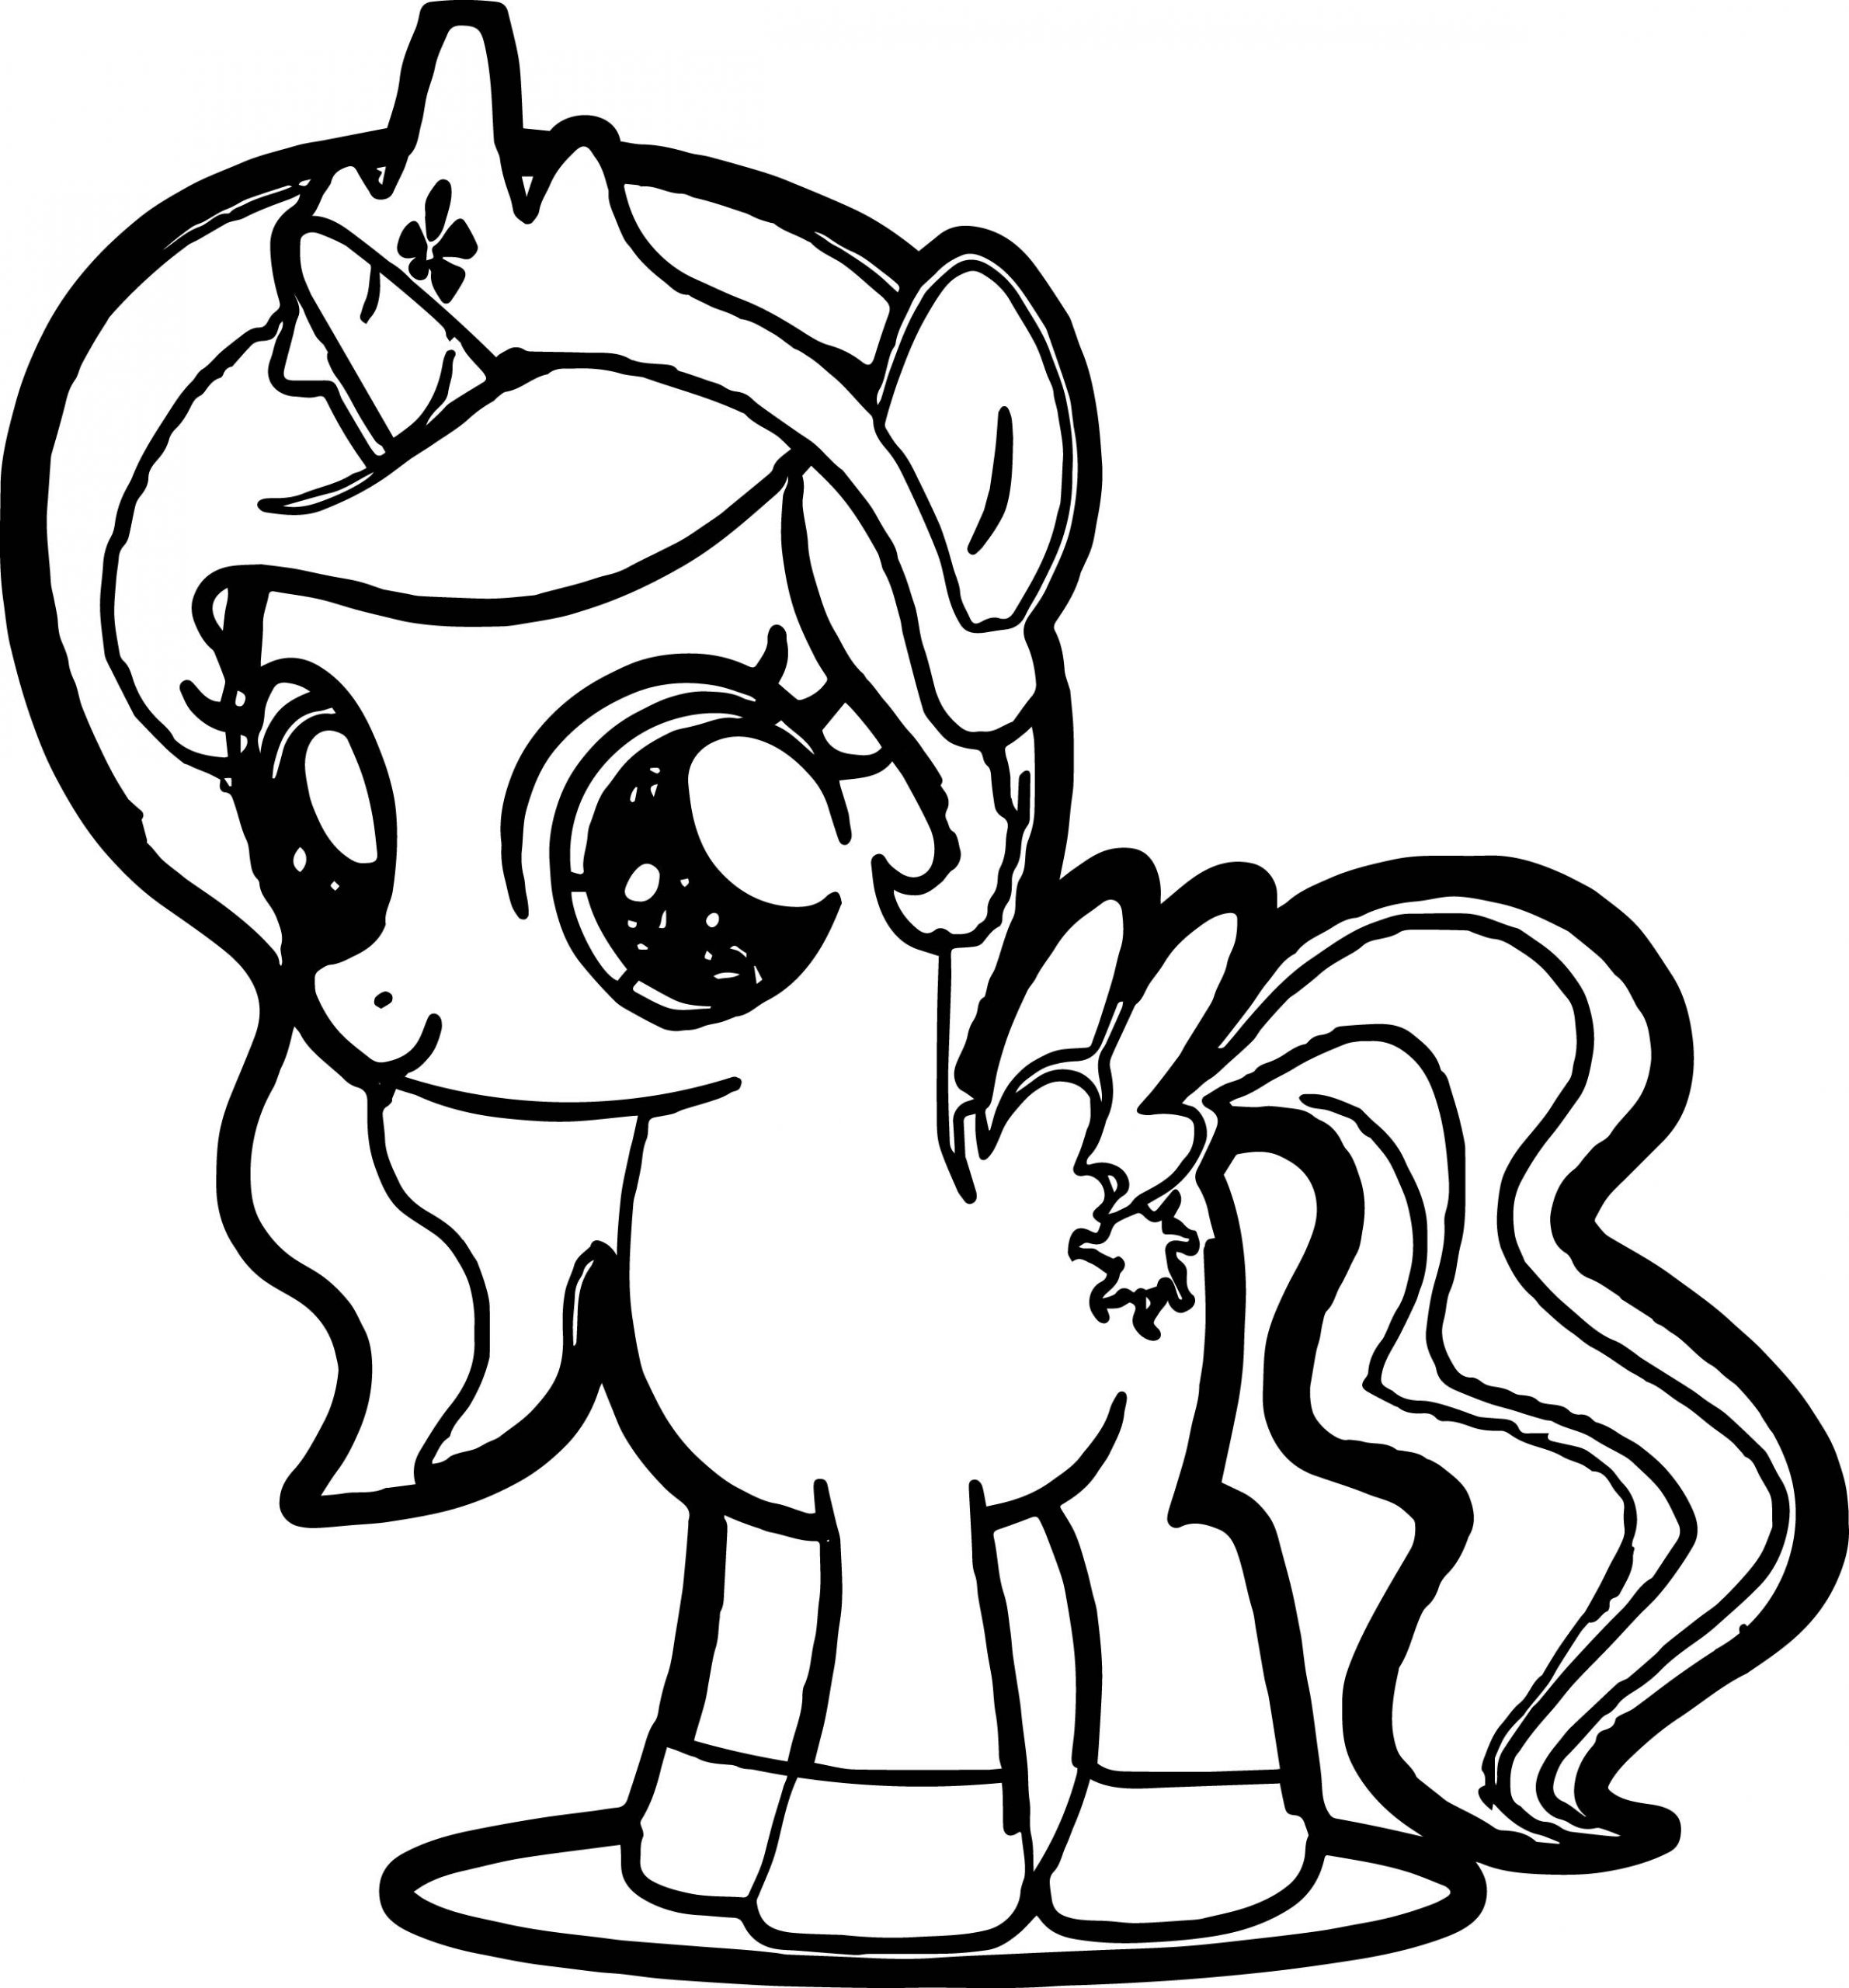 Baby My Little Pony Coloring Pages
 Cute Pony Coloring Page